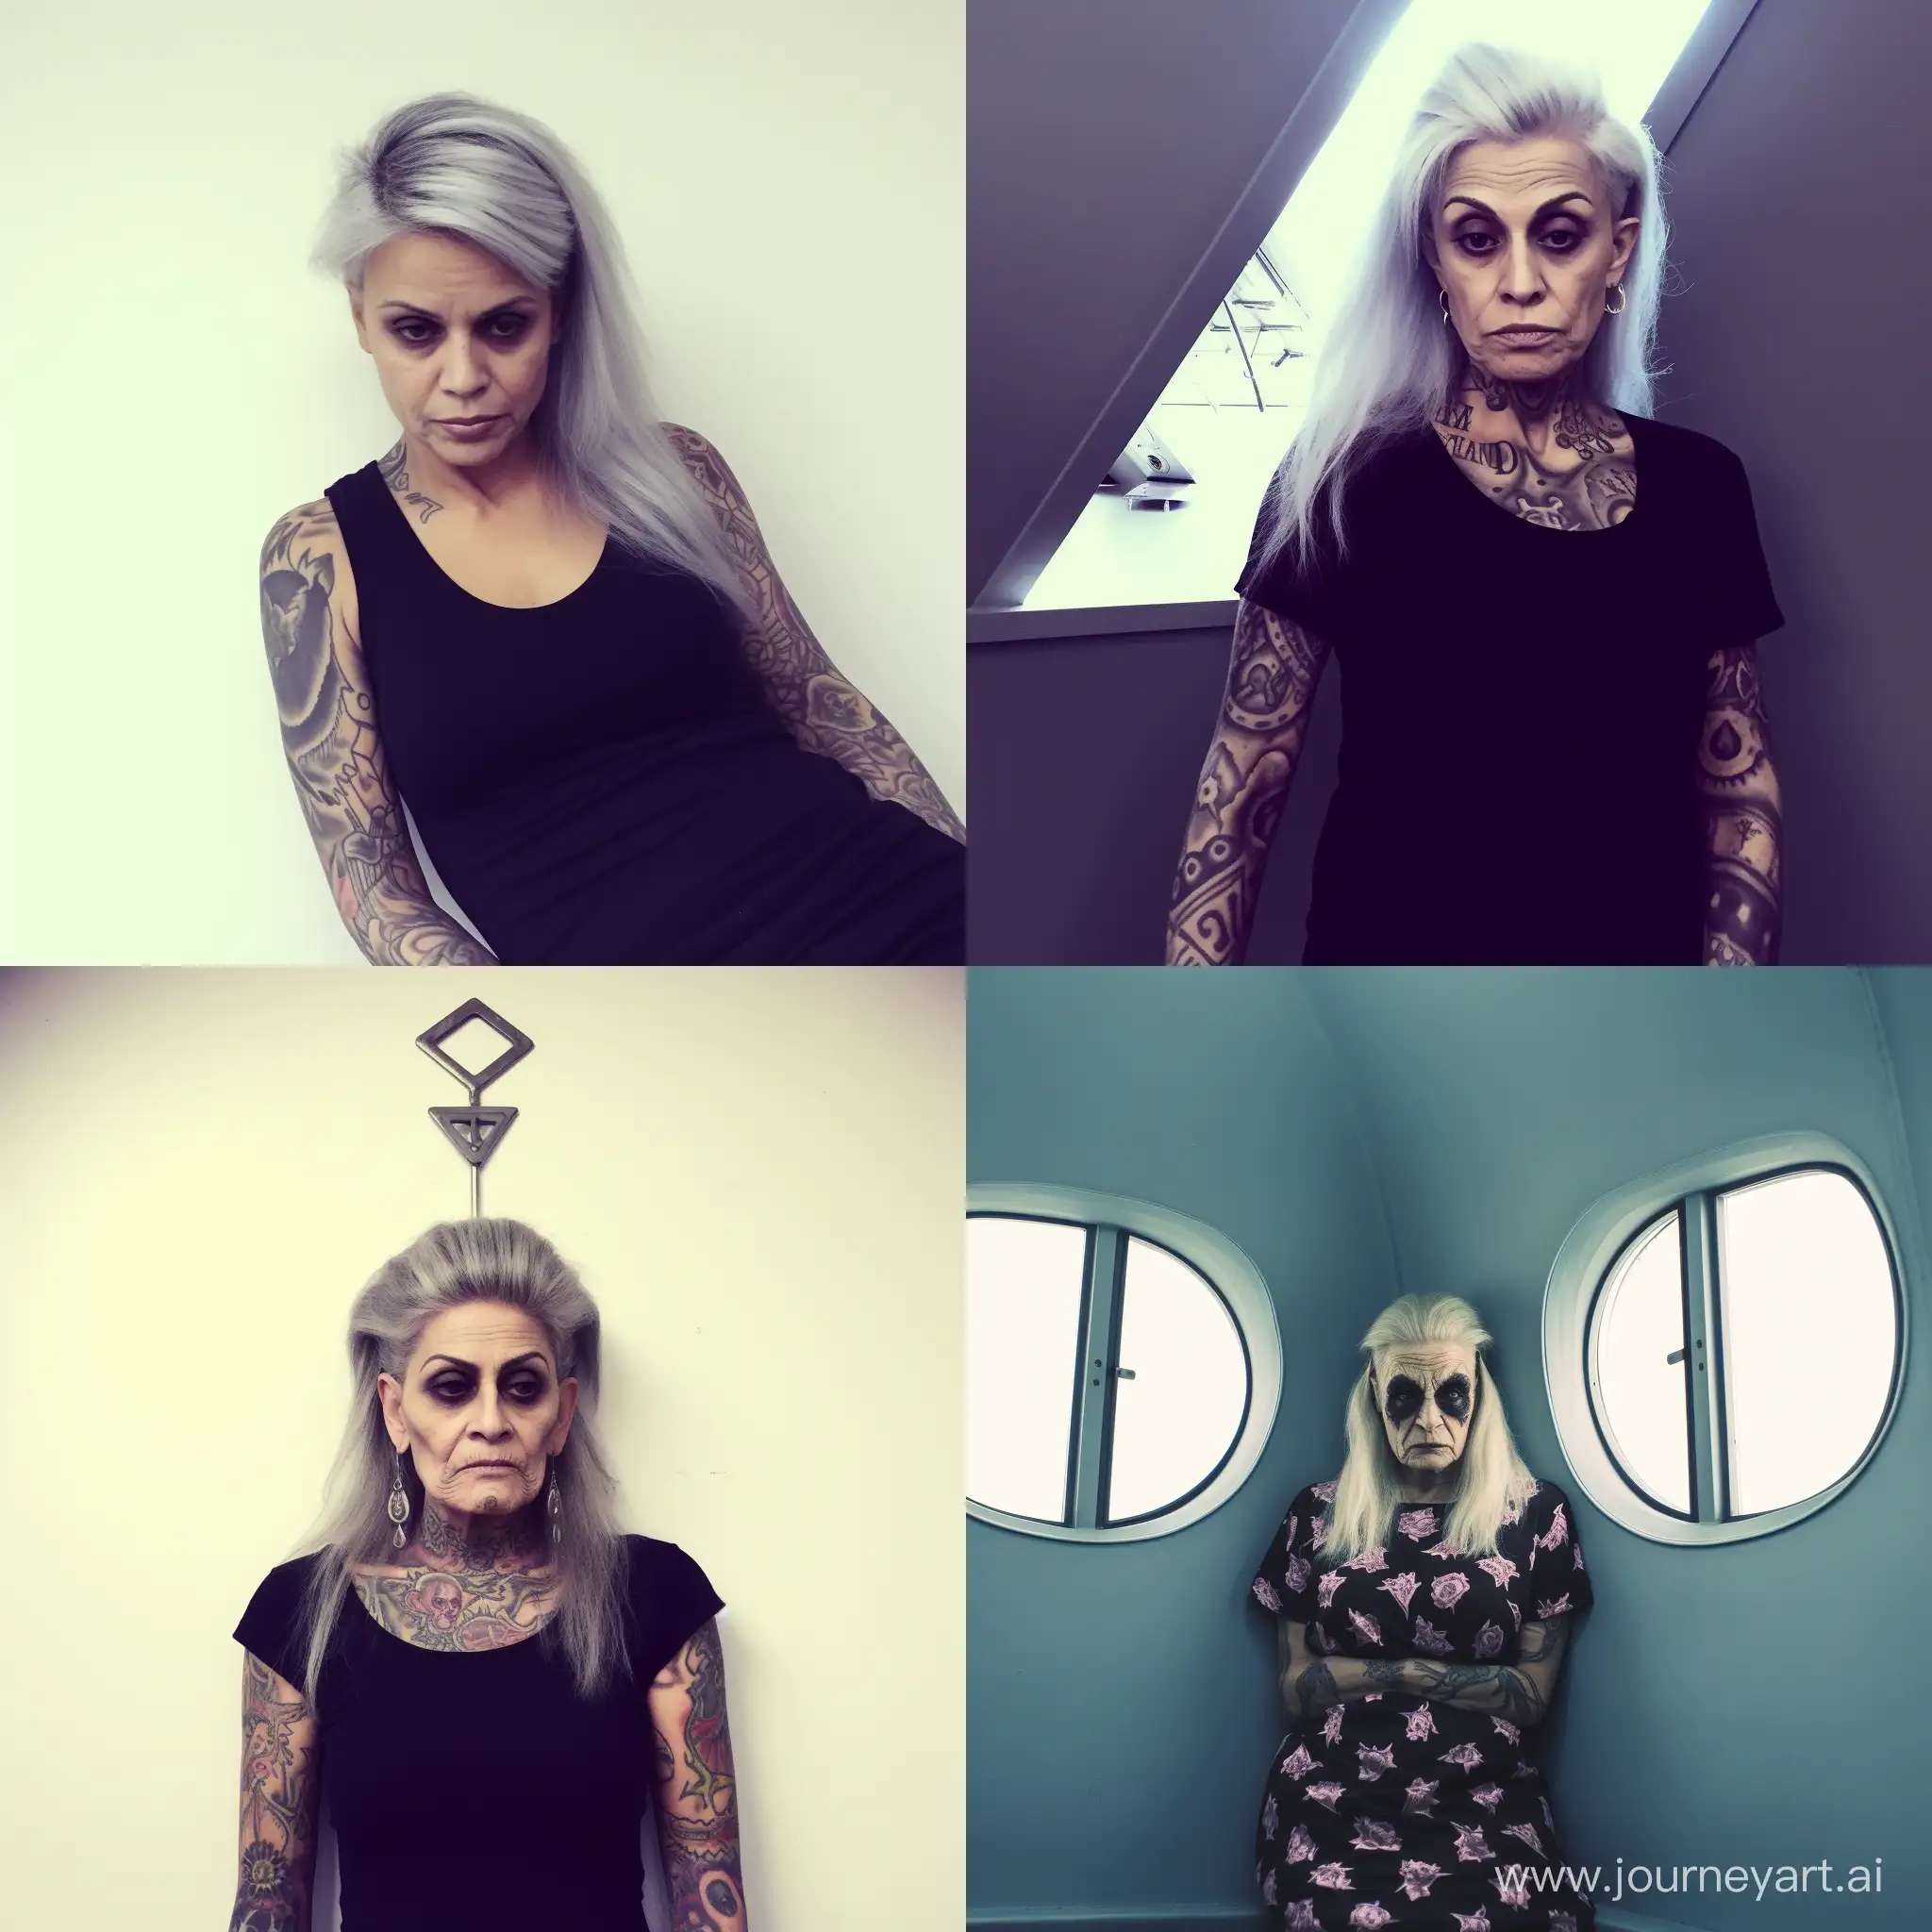 Edgy-SilverHaired-Womans-Selfie-with-Tattoos-and-Piercings